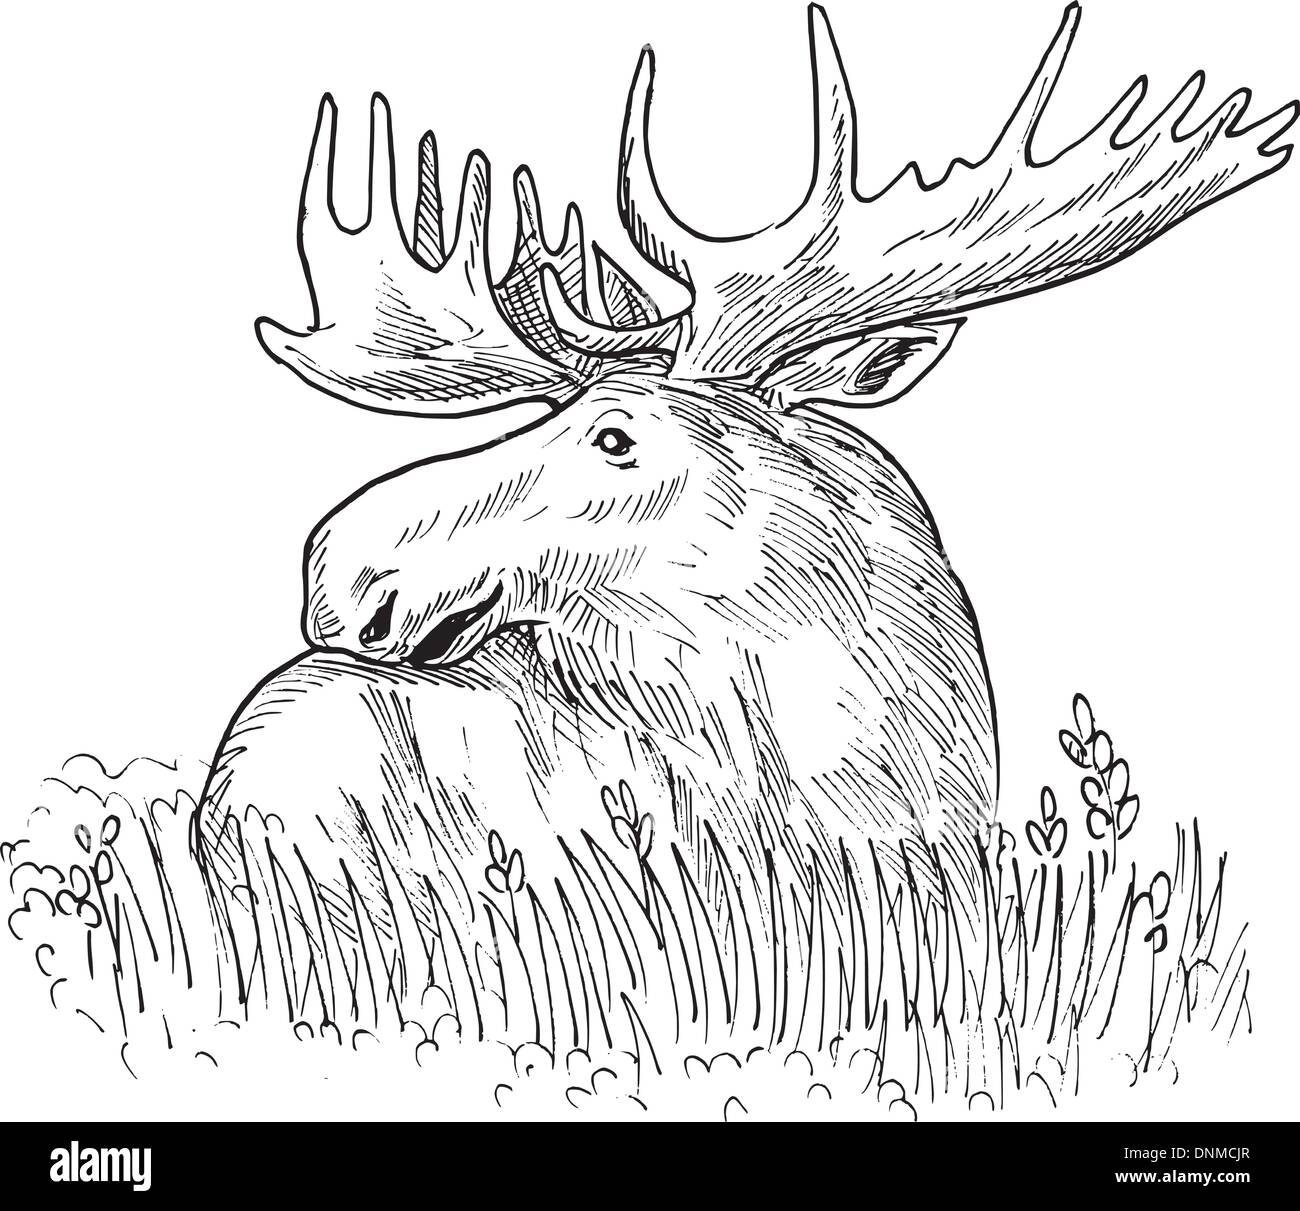 hand sketched drawing  illustration of a moose or common European elk done in black and white. Stock Vector